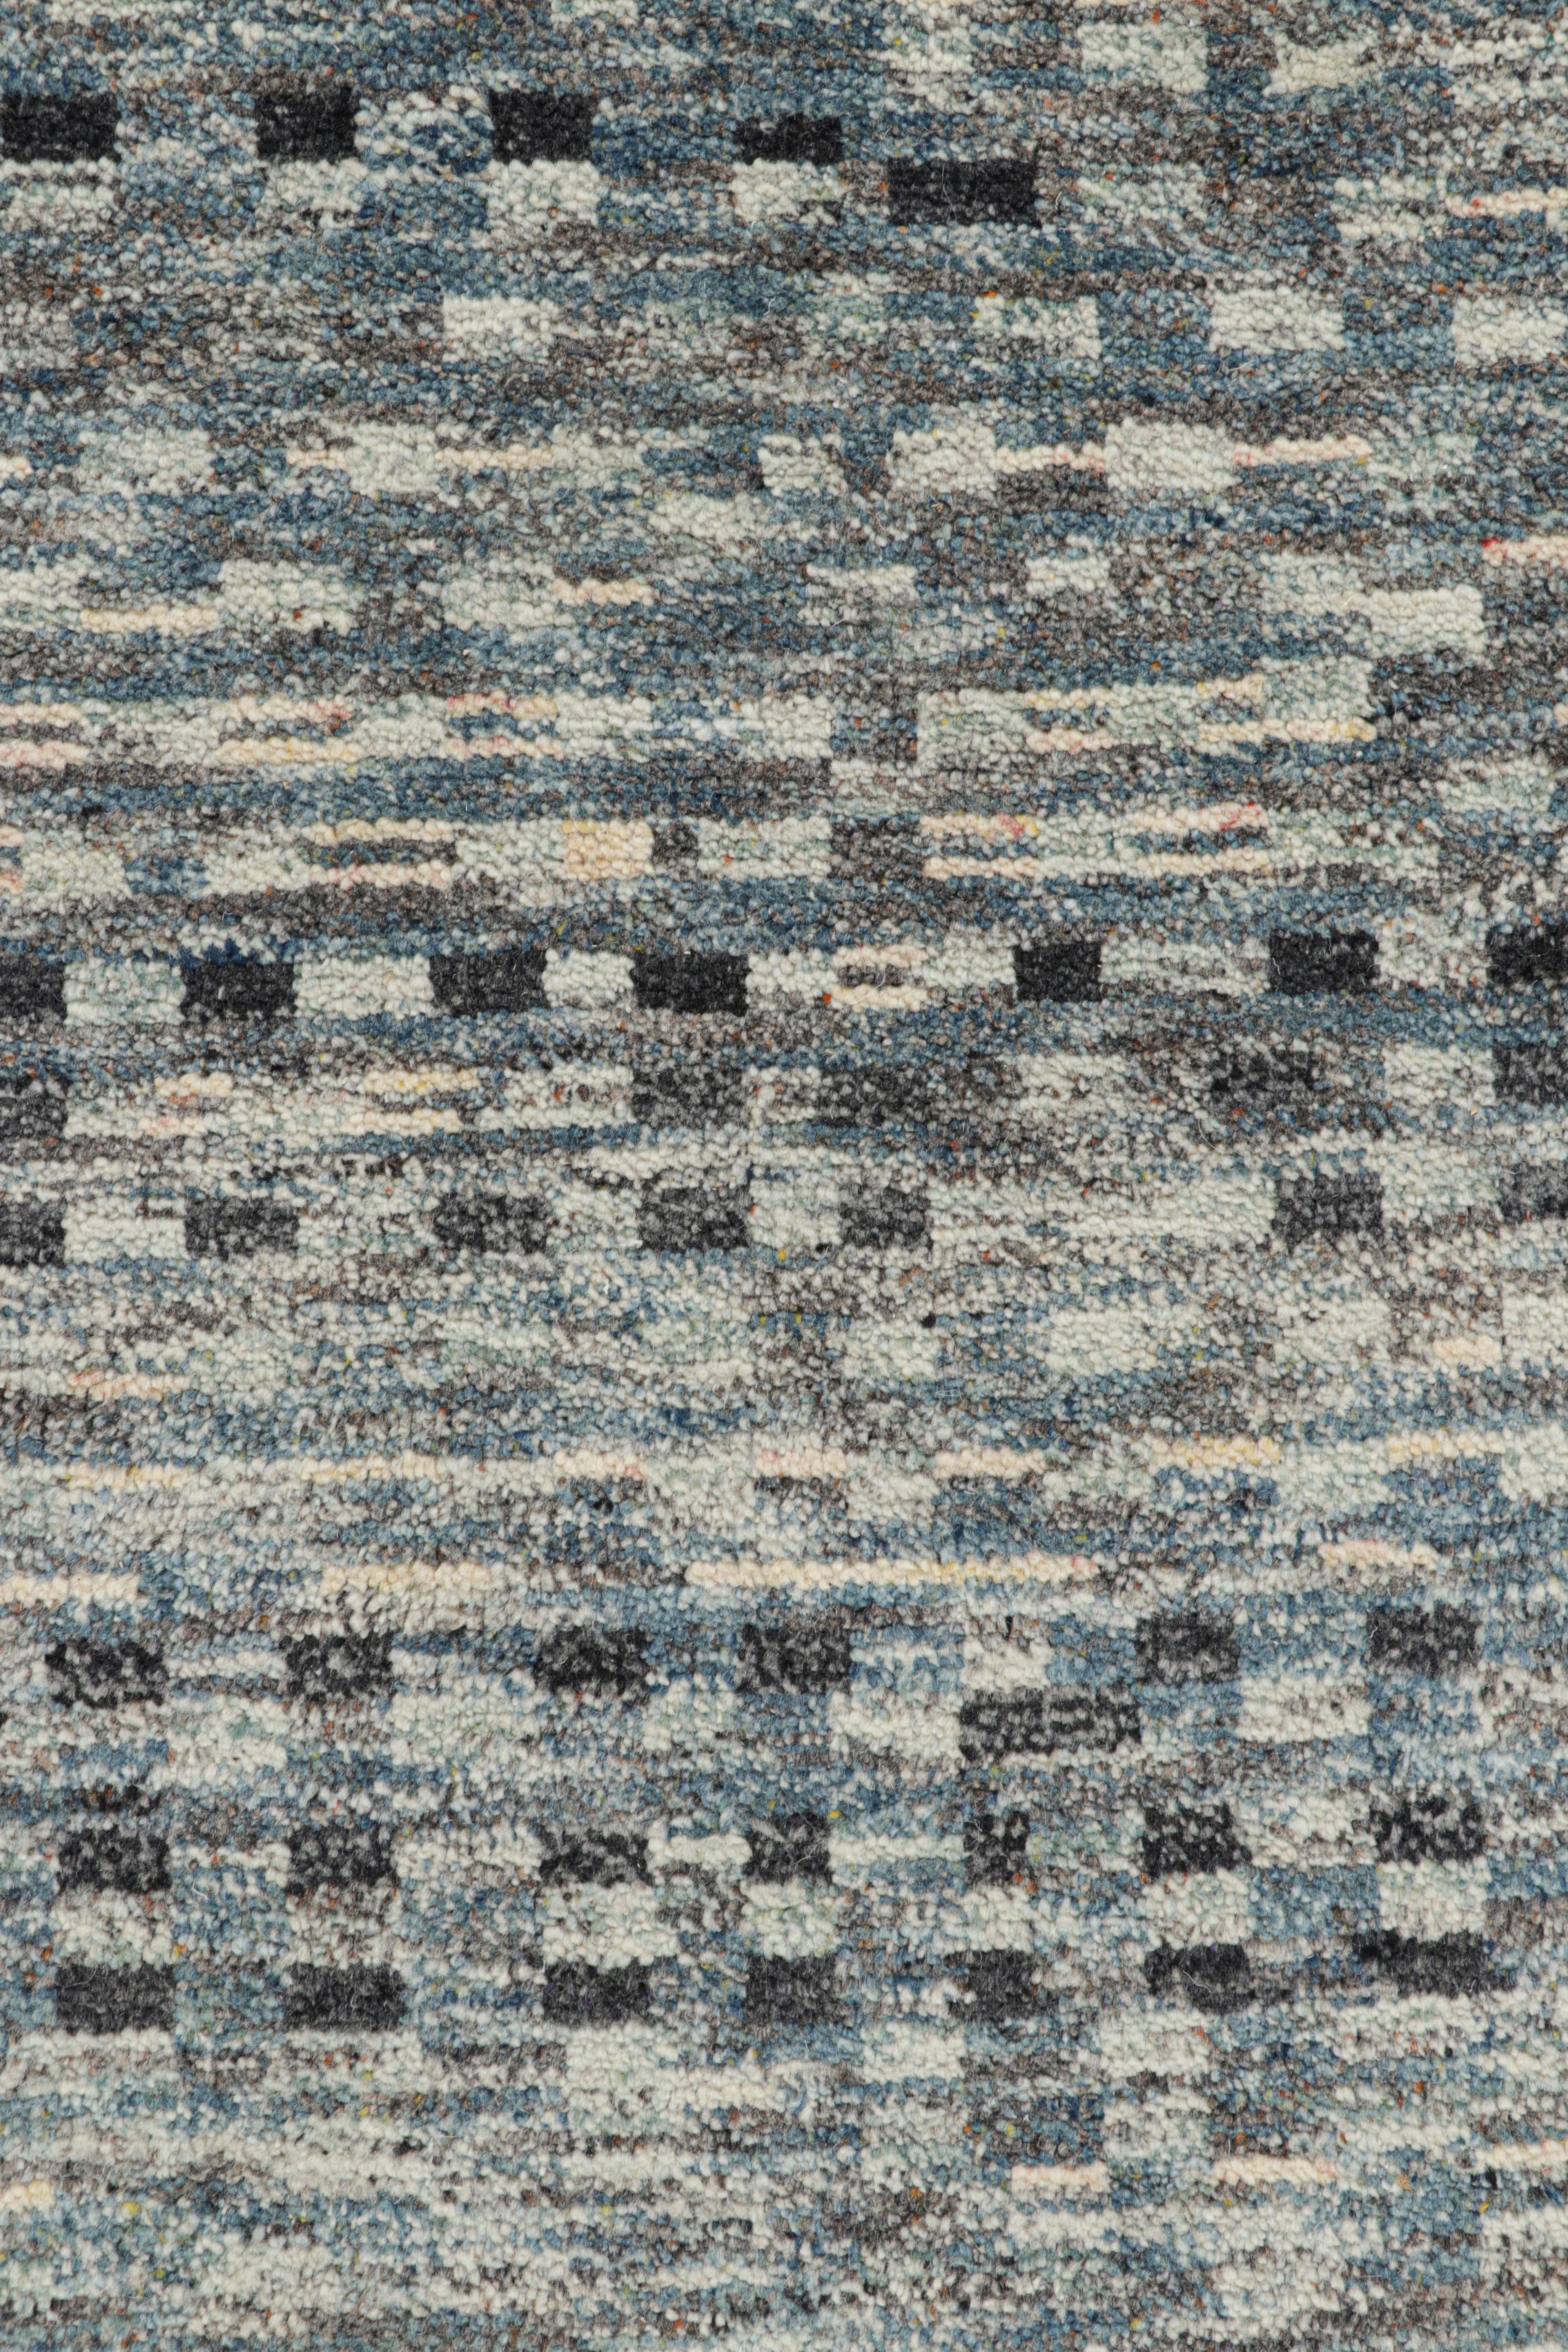 Tribal Rug & Kilim’s Moroccan Style Rug in Blue, Gray and White Geometric Patterns For Sale